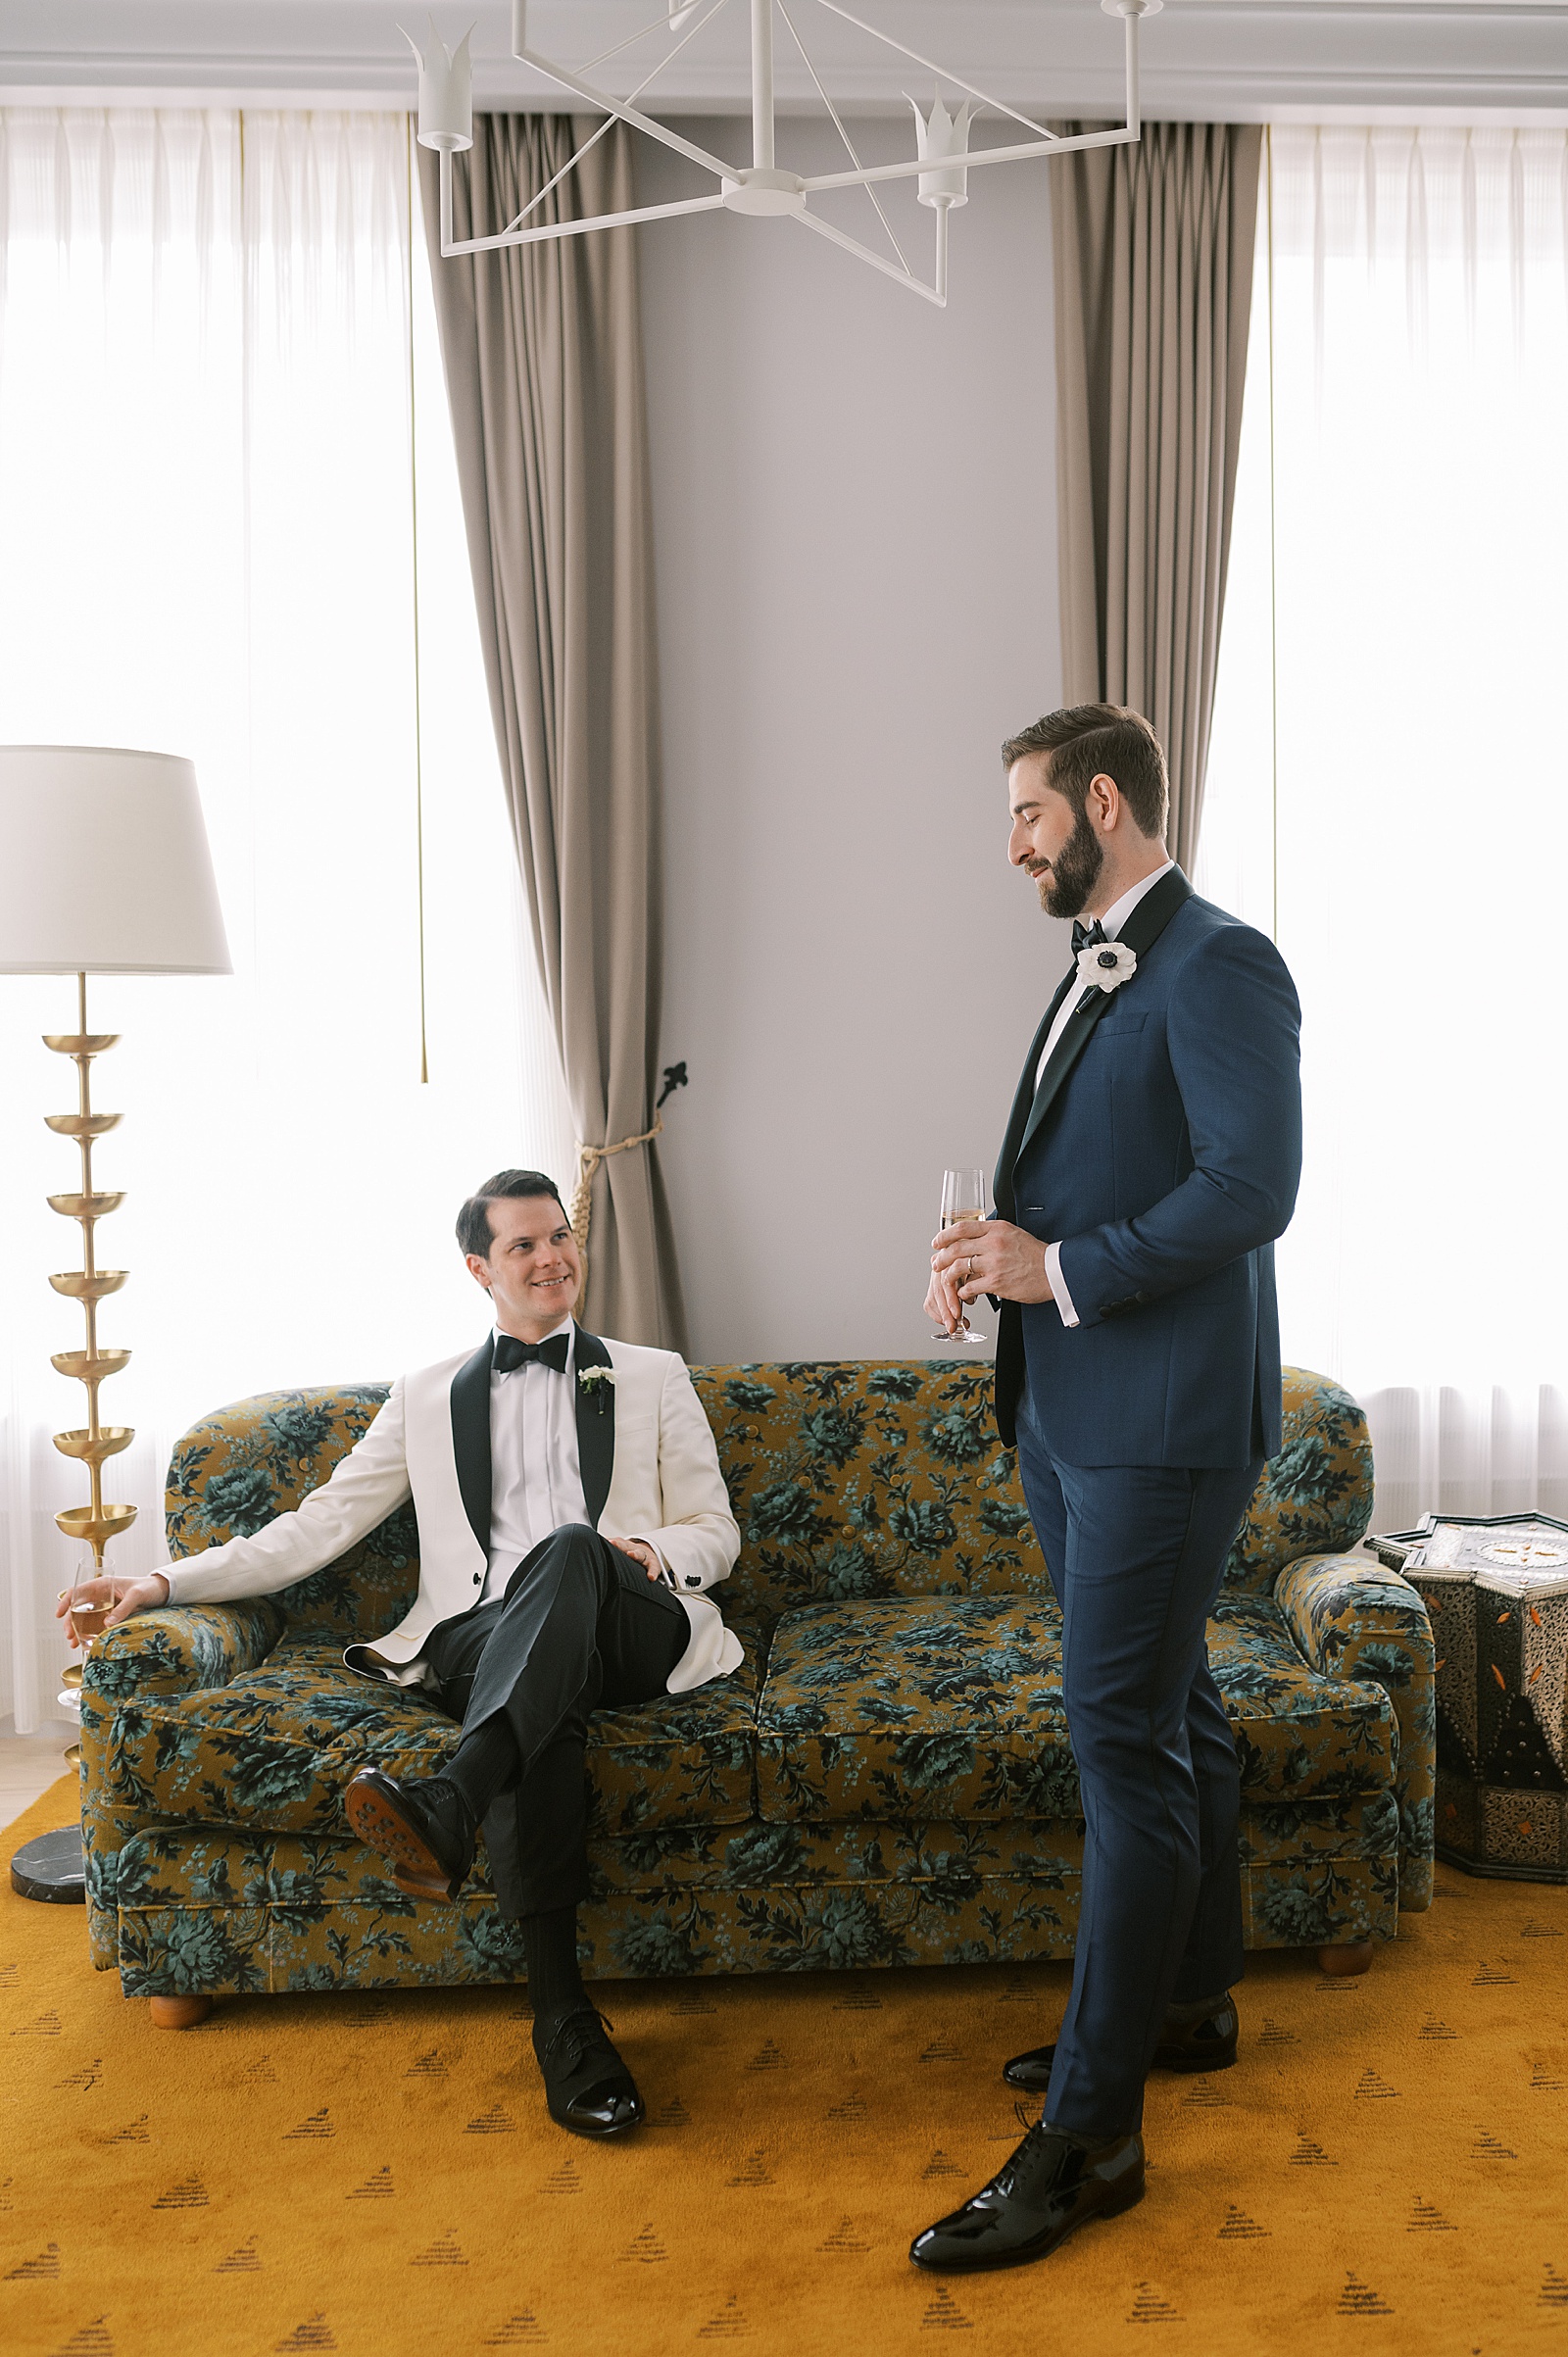 A groom stands beside another groom who is sitting on a couch while posing for wedding portraits.